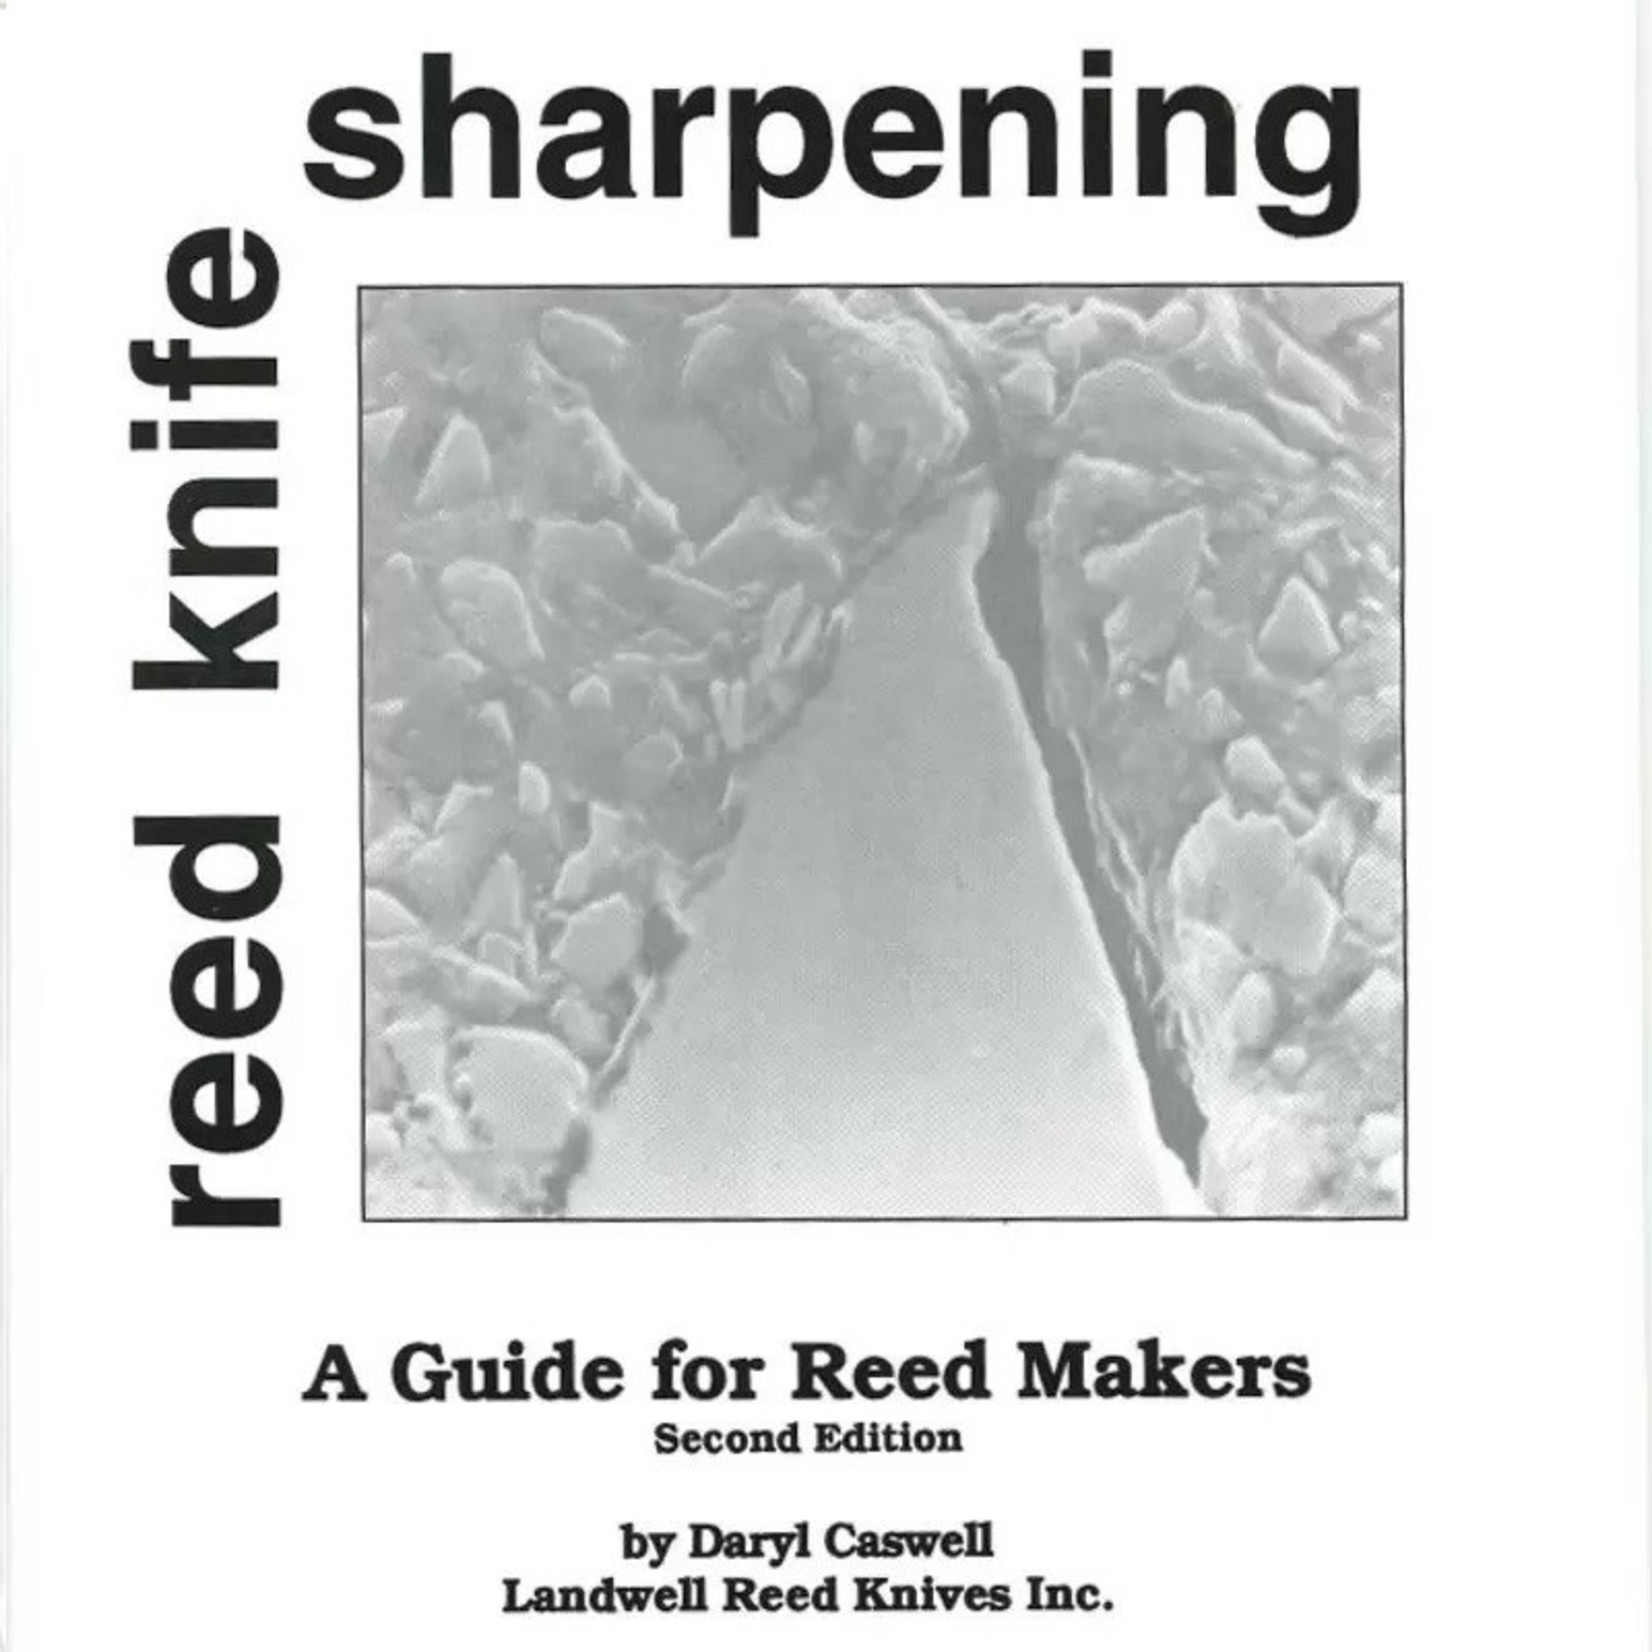 Landwell Reed Knife Sharpening: A Guide for Reed Makers, 2nd Ed. by Daryl Caswell, Landwell Reed Knives, Inc